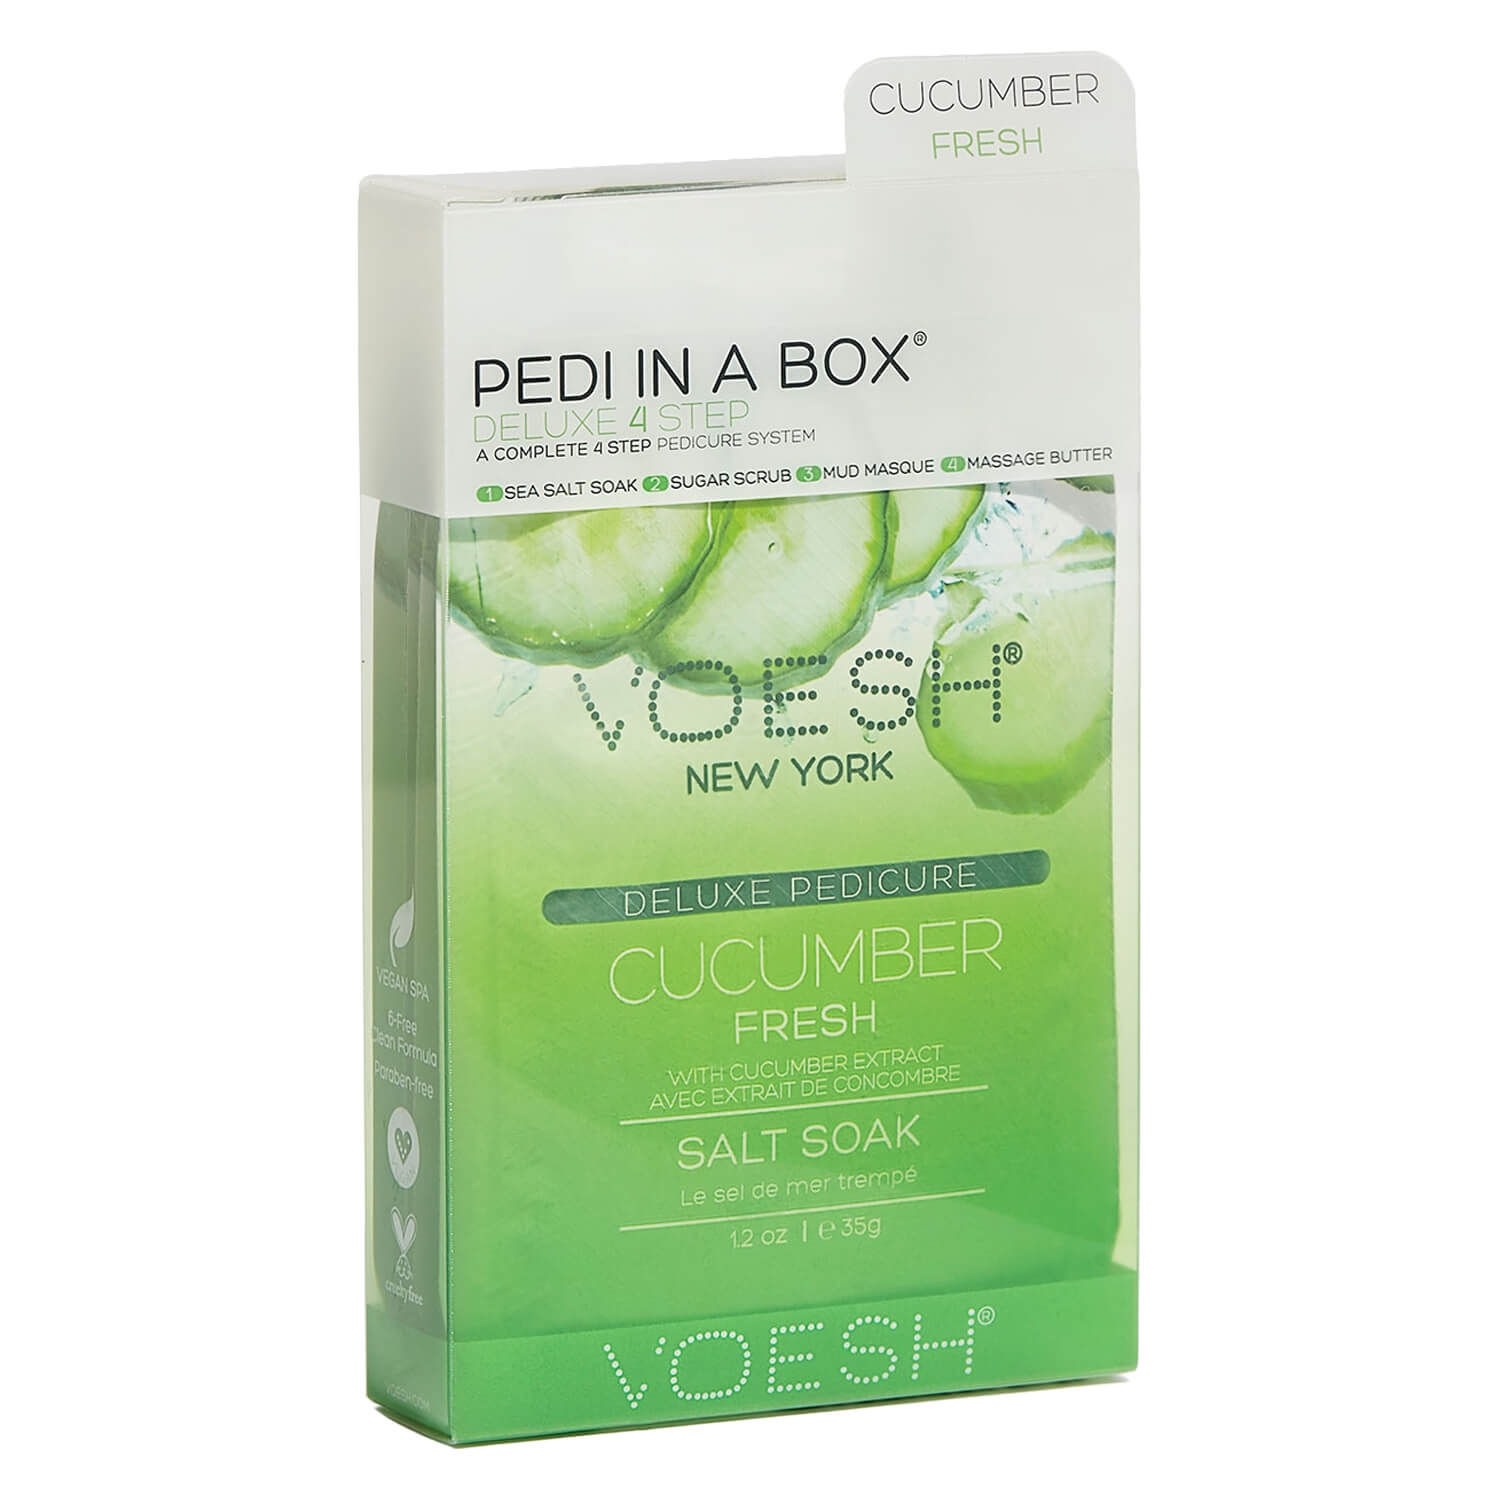 Product image from VOESH New York - Pedi In A Box 4 Step Cucumber Fresh